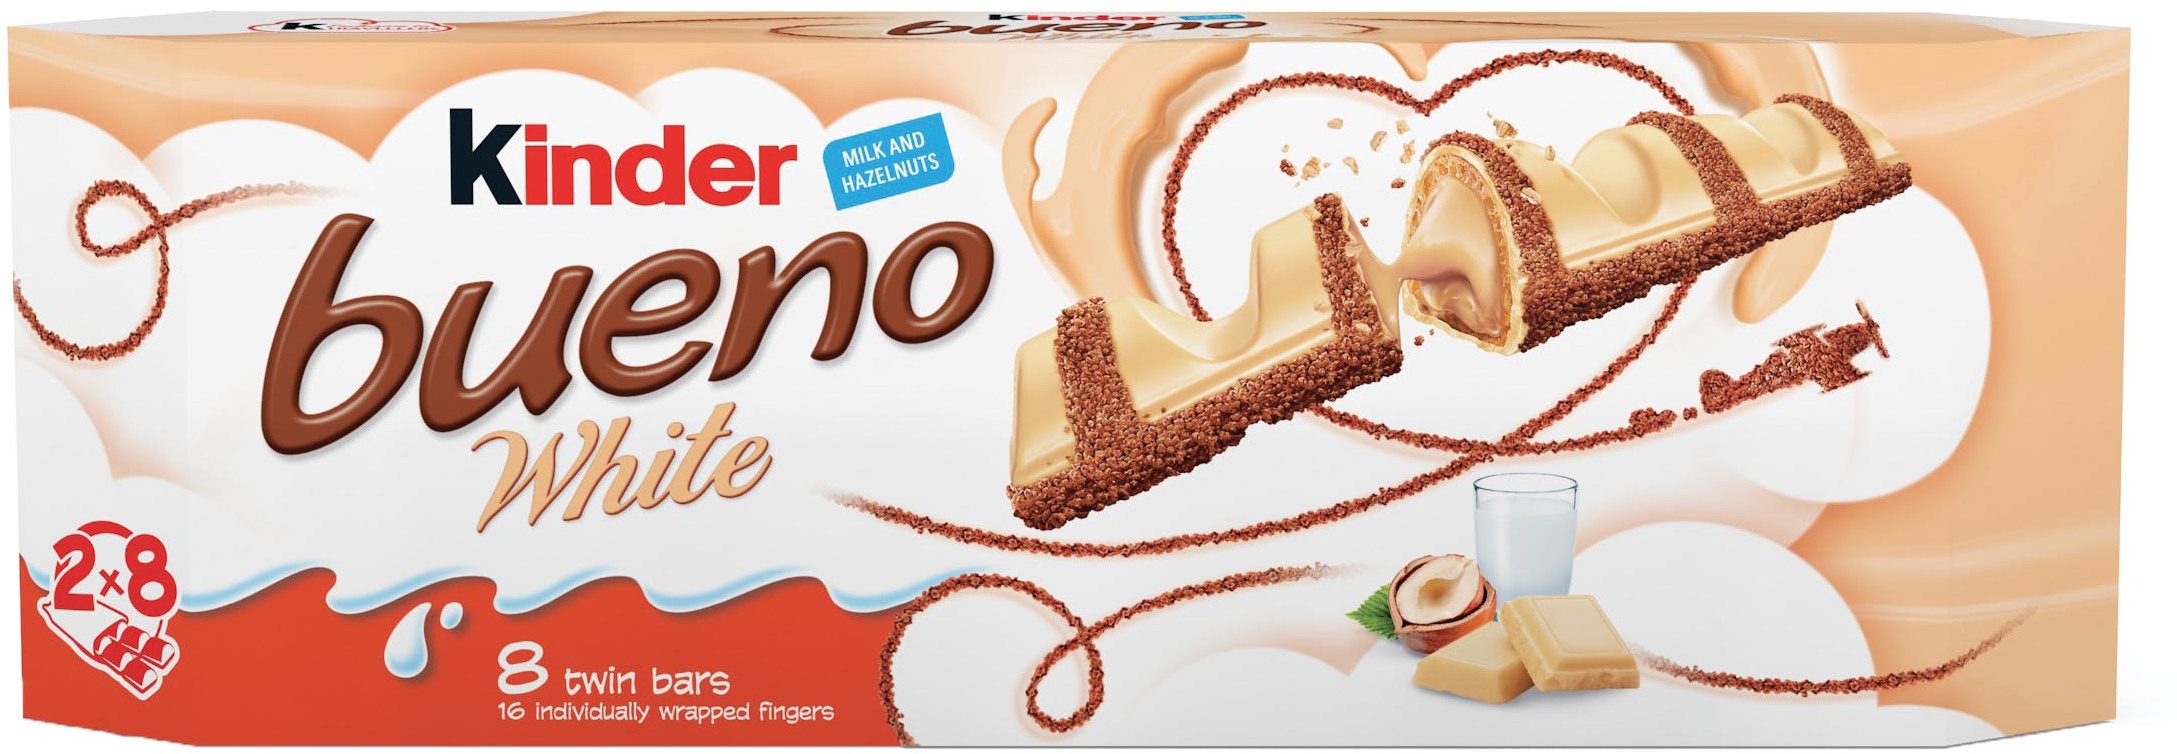 https://pictures.mydutyfree.net/images/products/85/37/original/kinder-bueno-white.8537.jpg